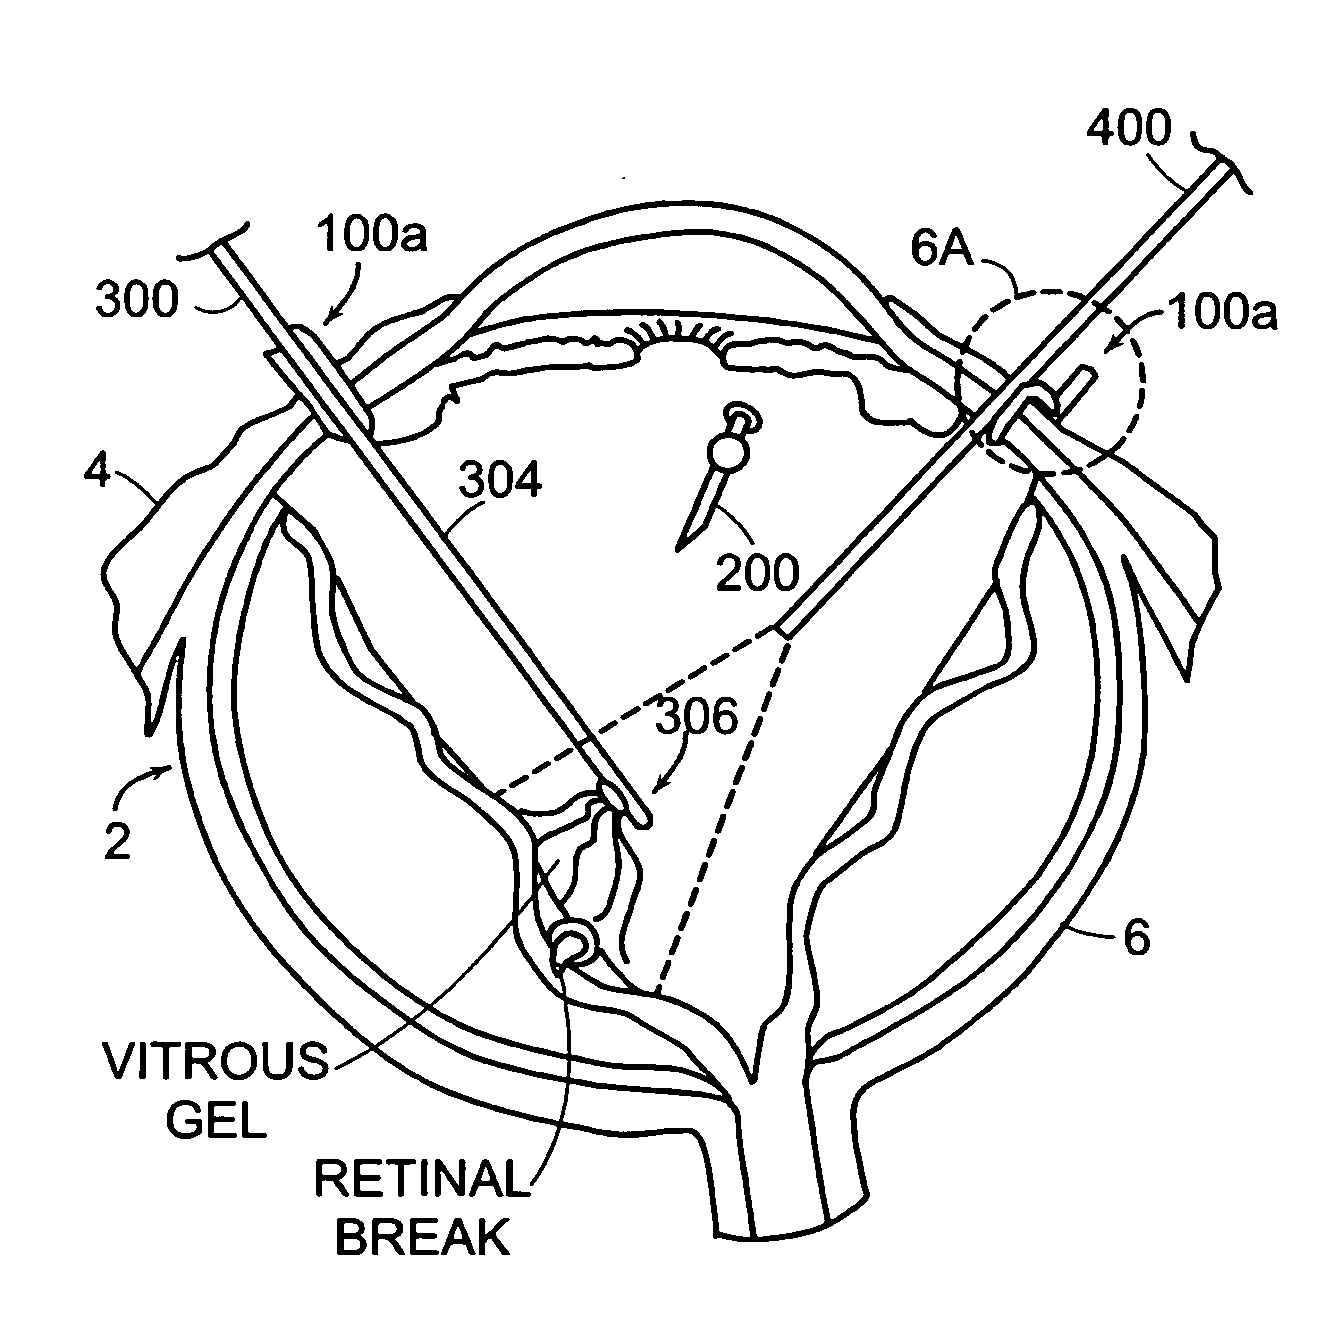 Sutureless occular surgical methods and instruments for use in such methods